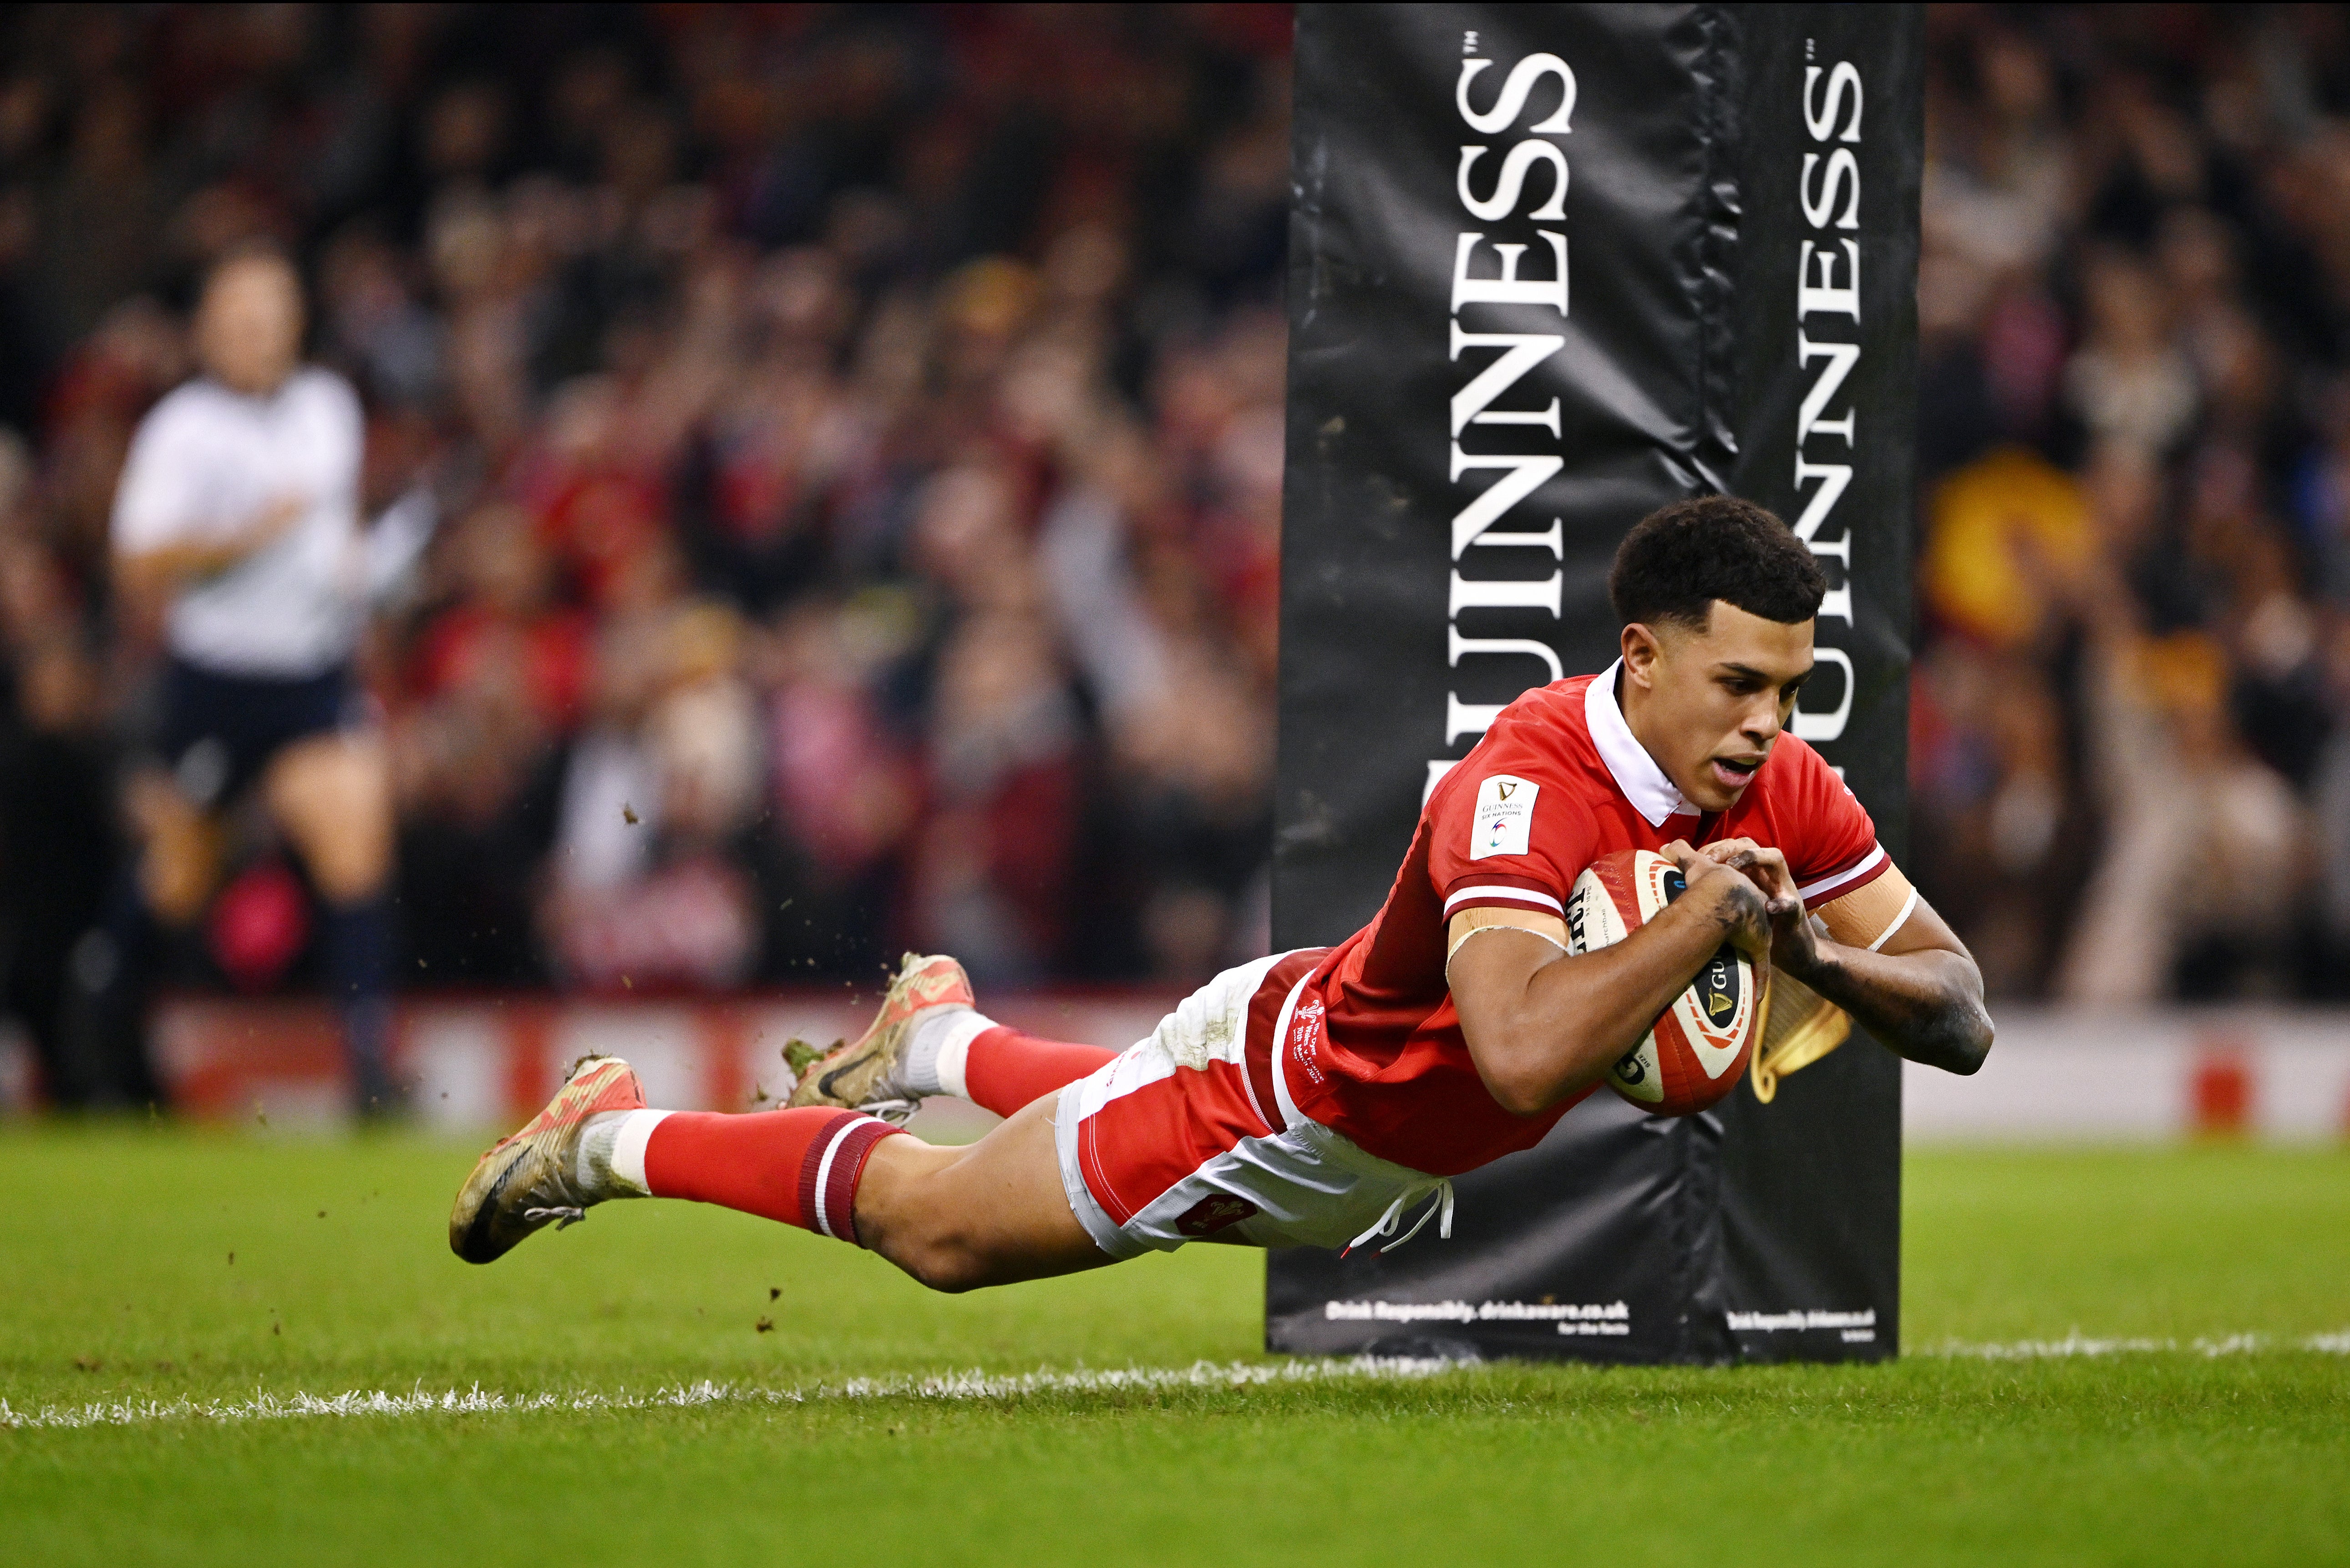 Rio Dyer raced away for Wales’s opening try